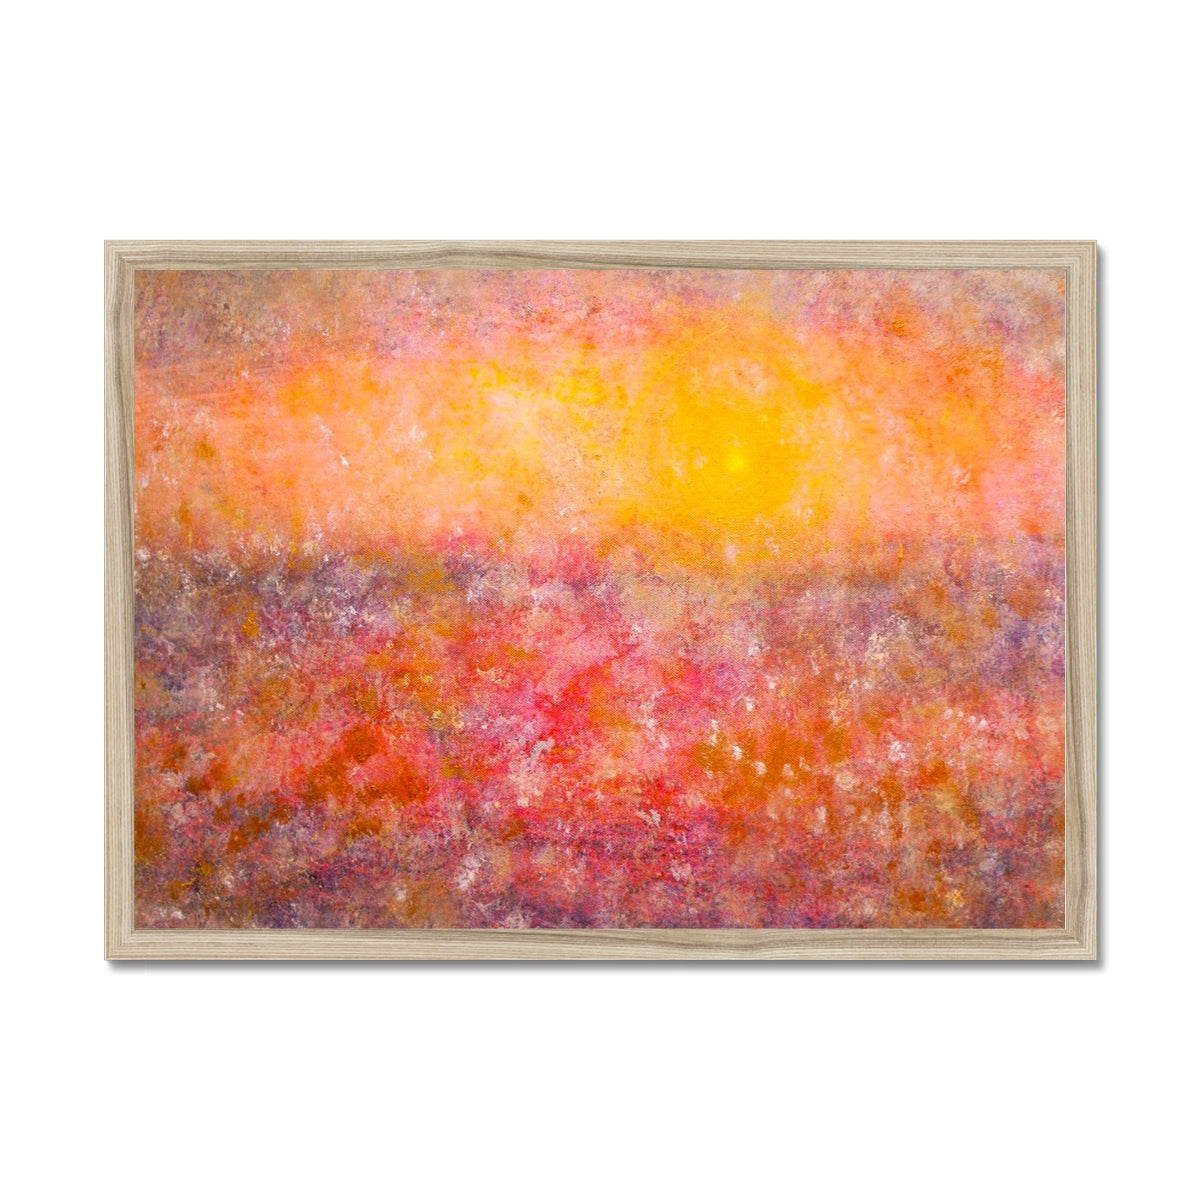 Sunrise Mist Horizon Abstract Painting | Framed Prints From Scotland-Framed Prints-Abstract & Impressionistic Art Gallery-A2 Landscape-Natural Frame-Paintings, Prints, Homeware, Art Gifts From Scotland By Scottish Artist Kevin Hunter